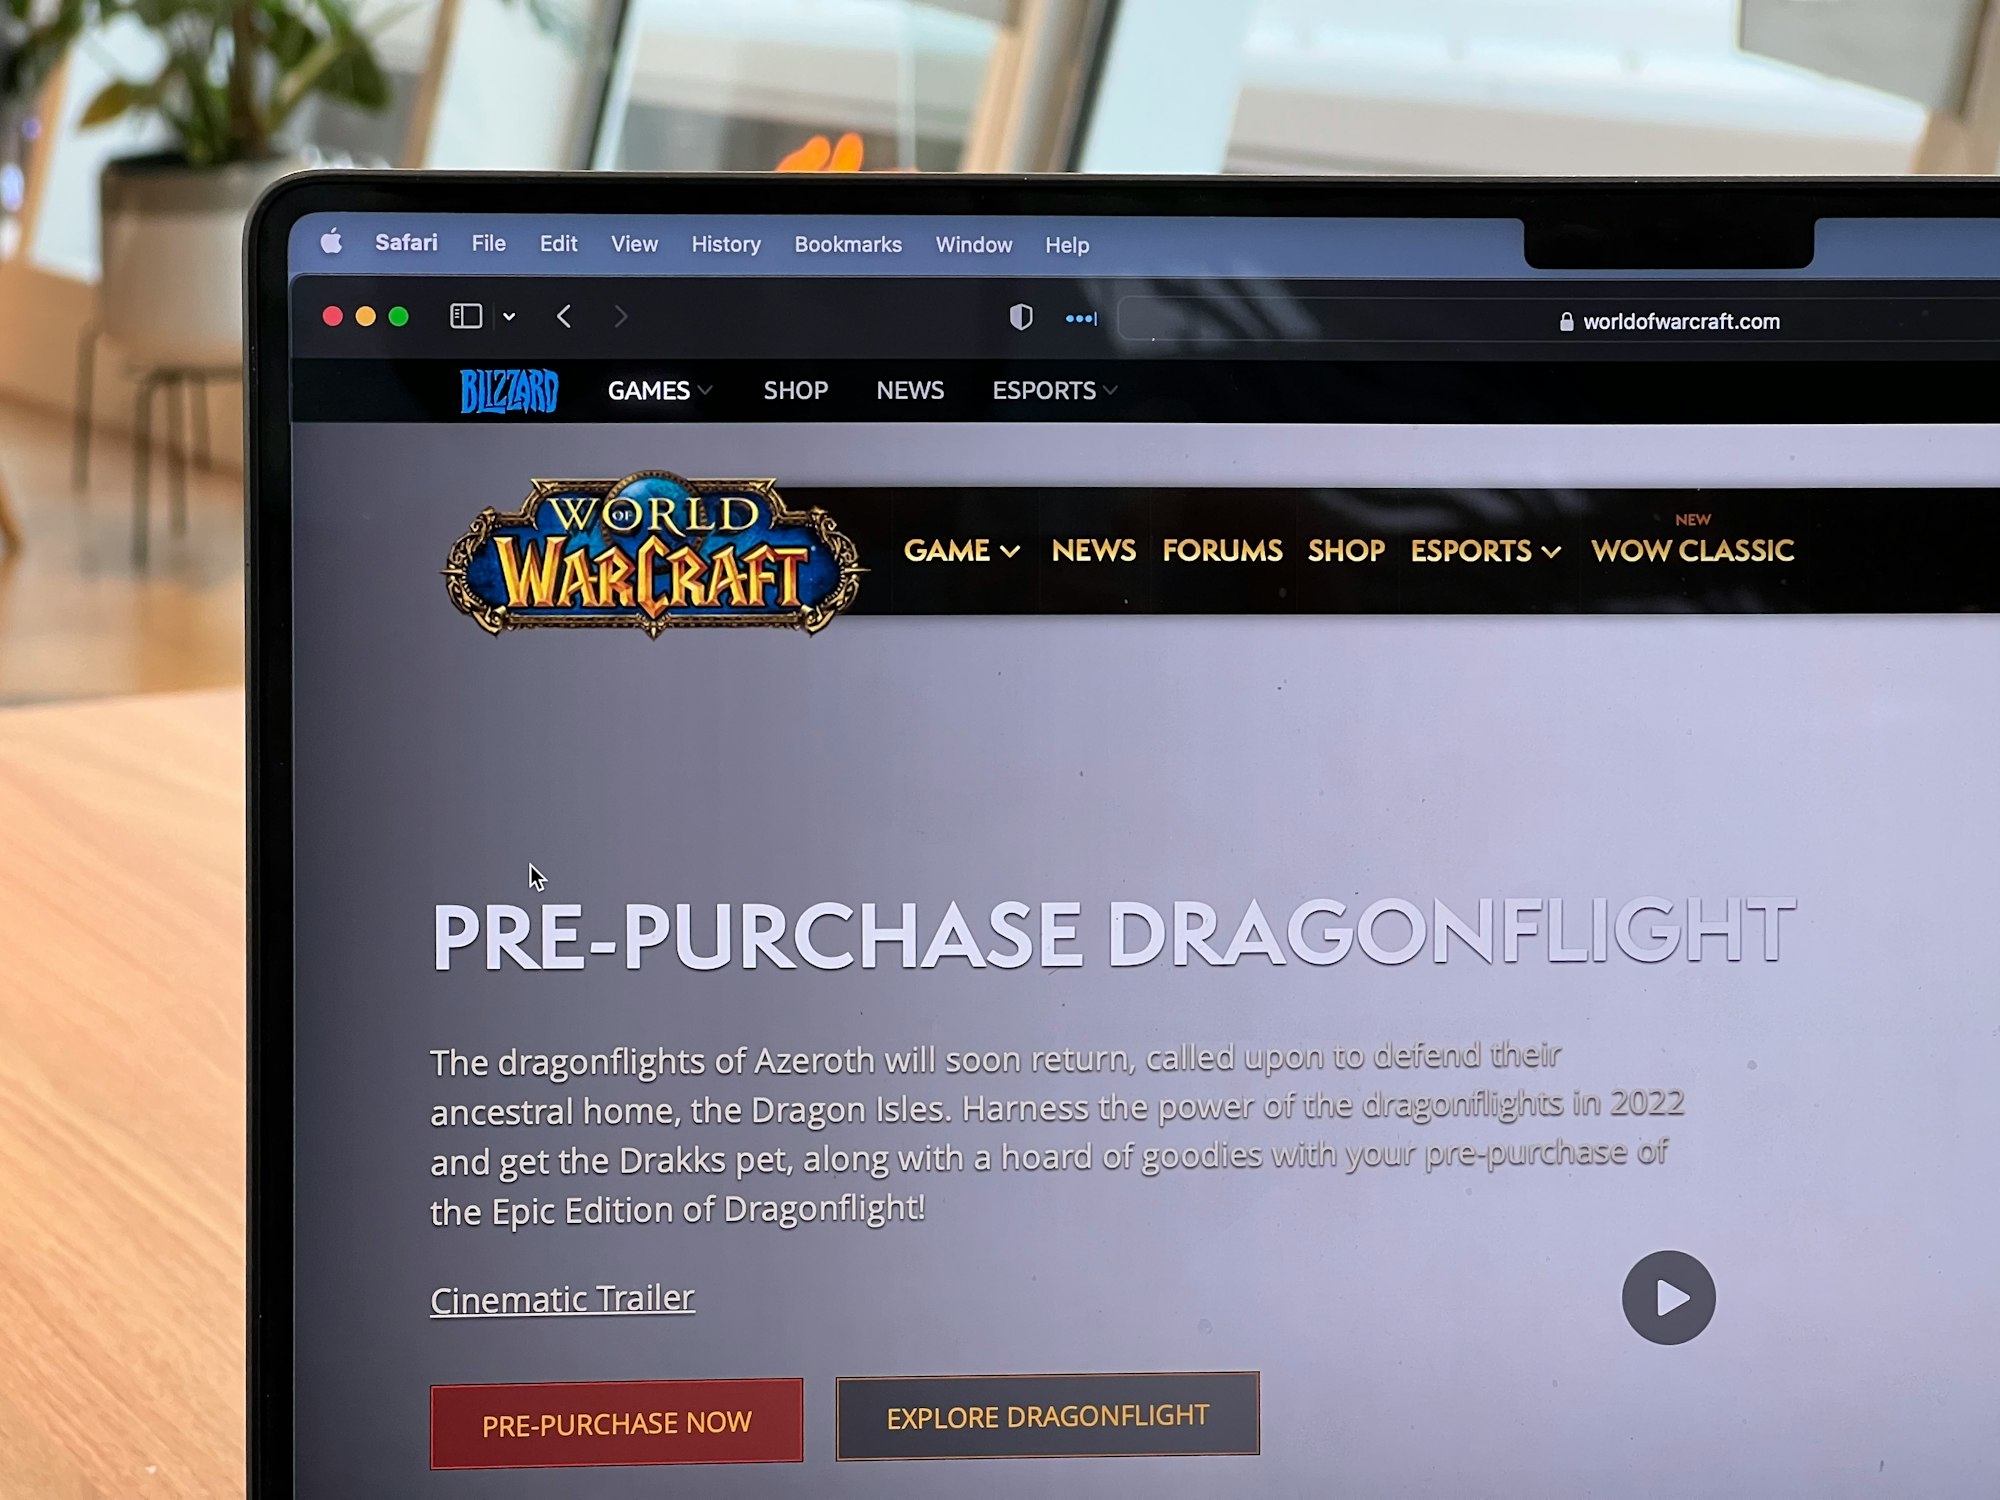 Chinese gamers will lose access to 'World of Warcraft', 'Diablo', 'StarCraft', and others